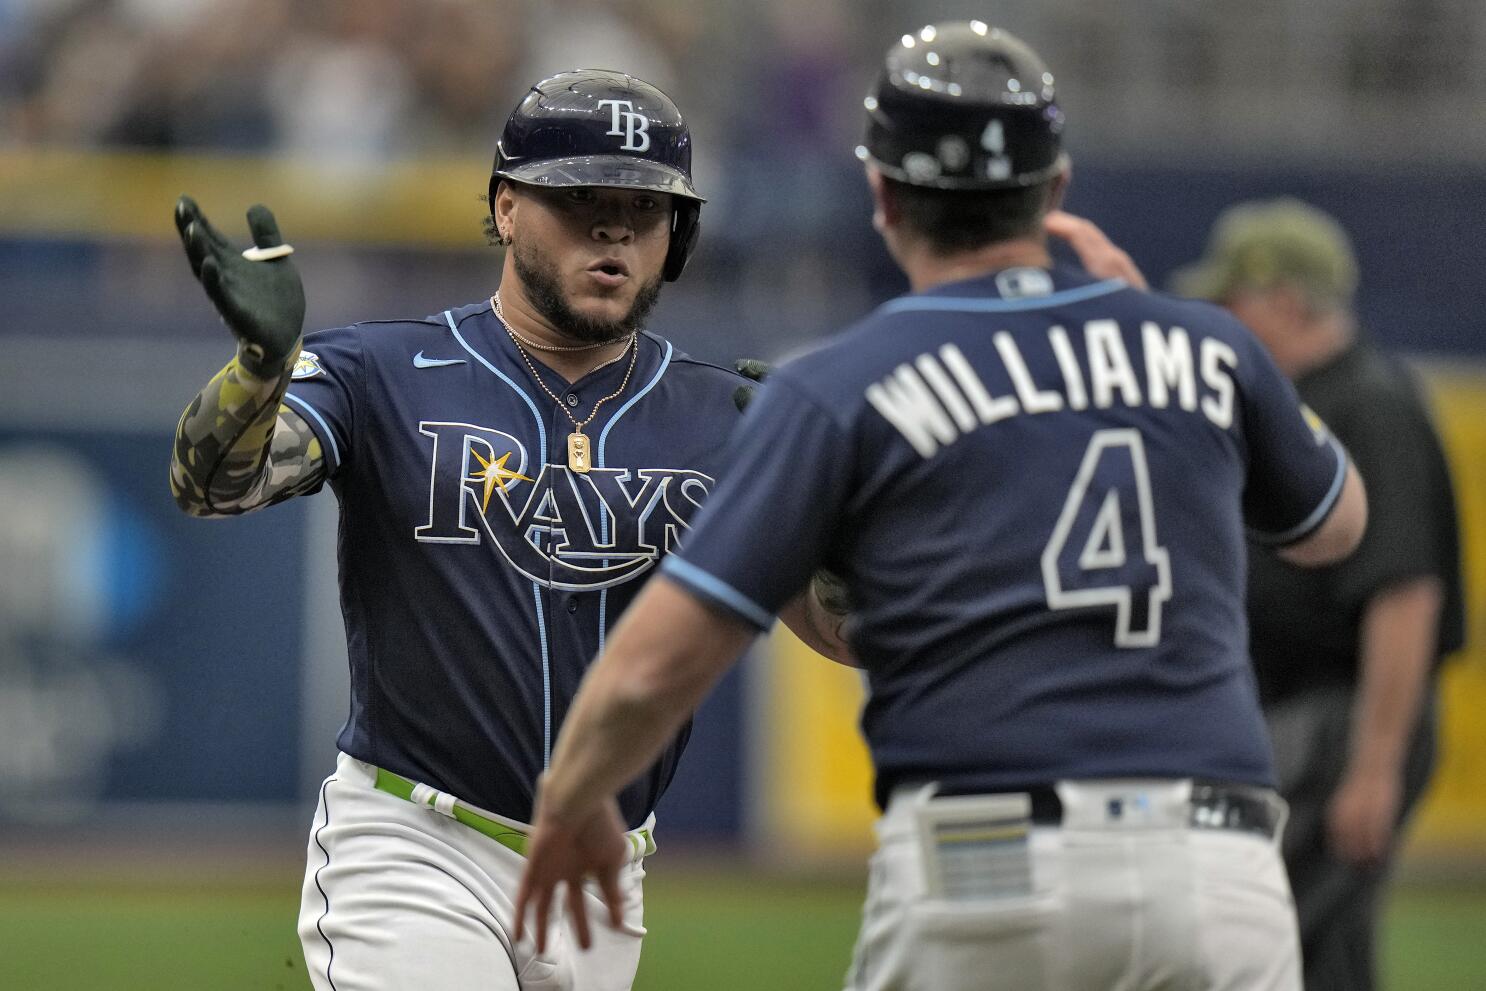 Brewers trade 2 relievers, acquire SS Adames from Rays